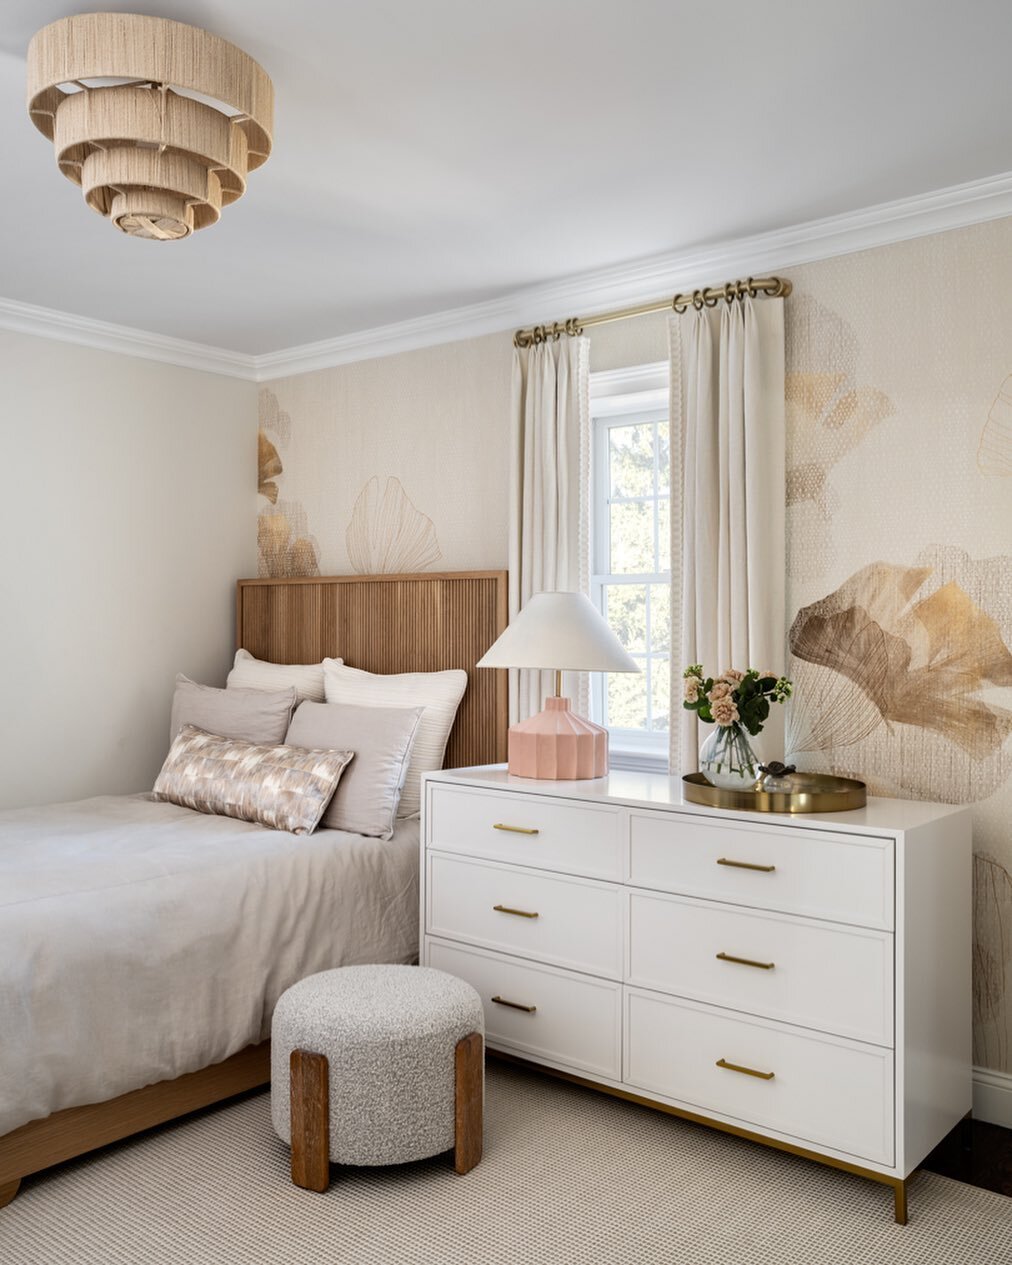 Girls bedroom at our Bayside project. Custom bed and desk by @soleil.newyork 📷 @kylejcaldwell